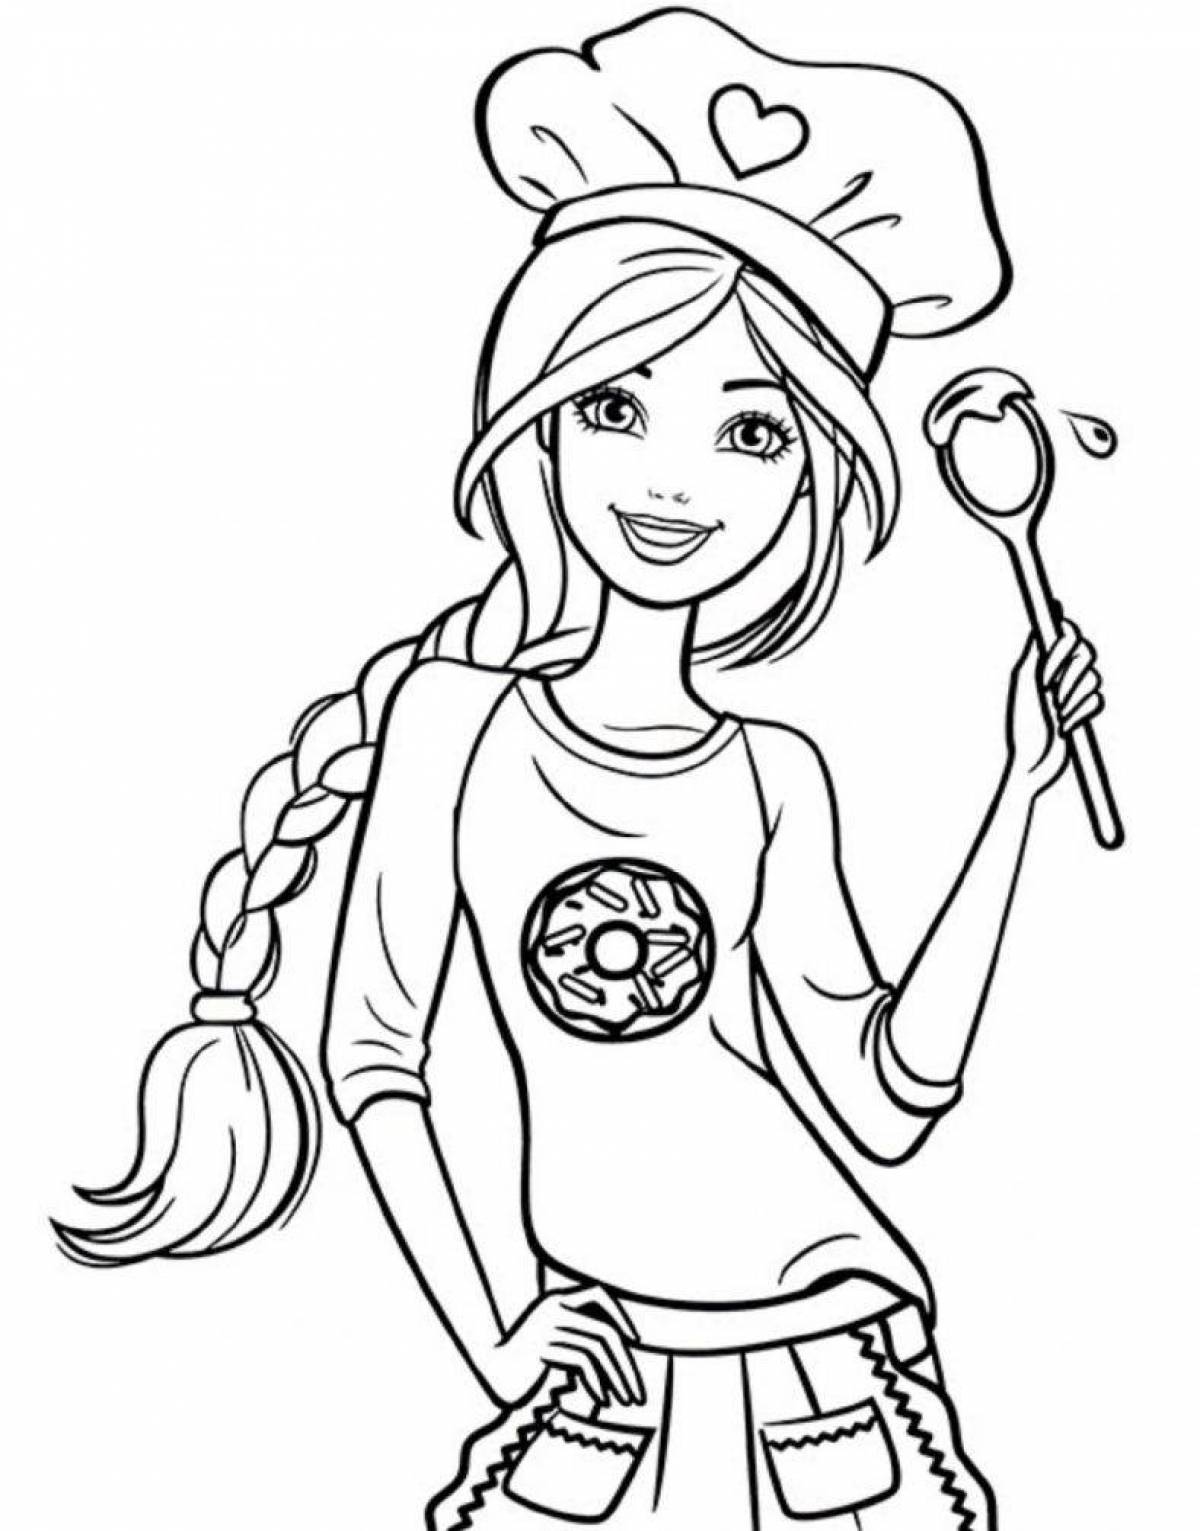 Modern coloring pages for 10 year old girls, cool